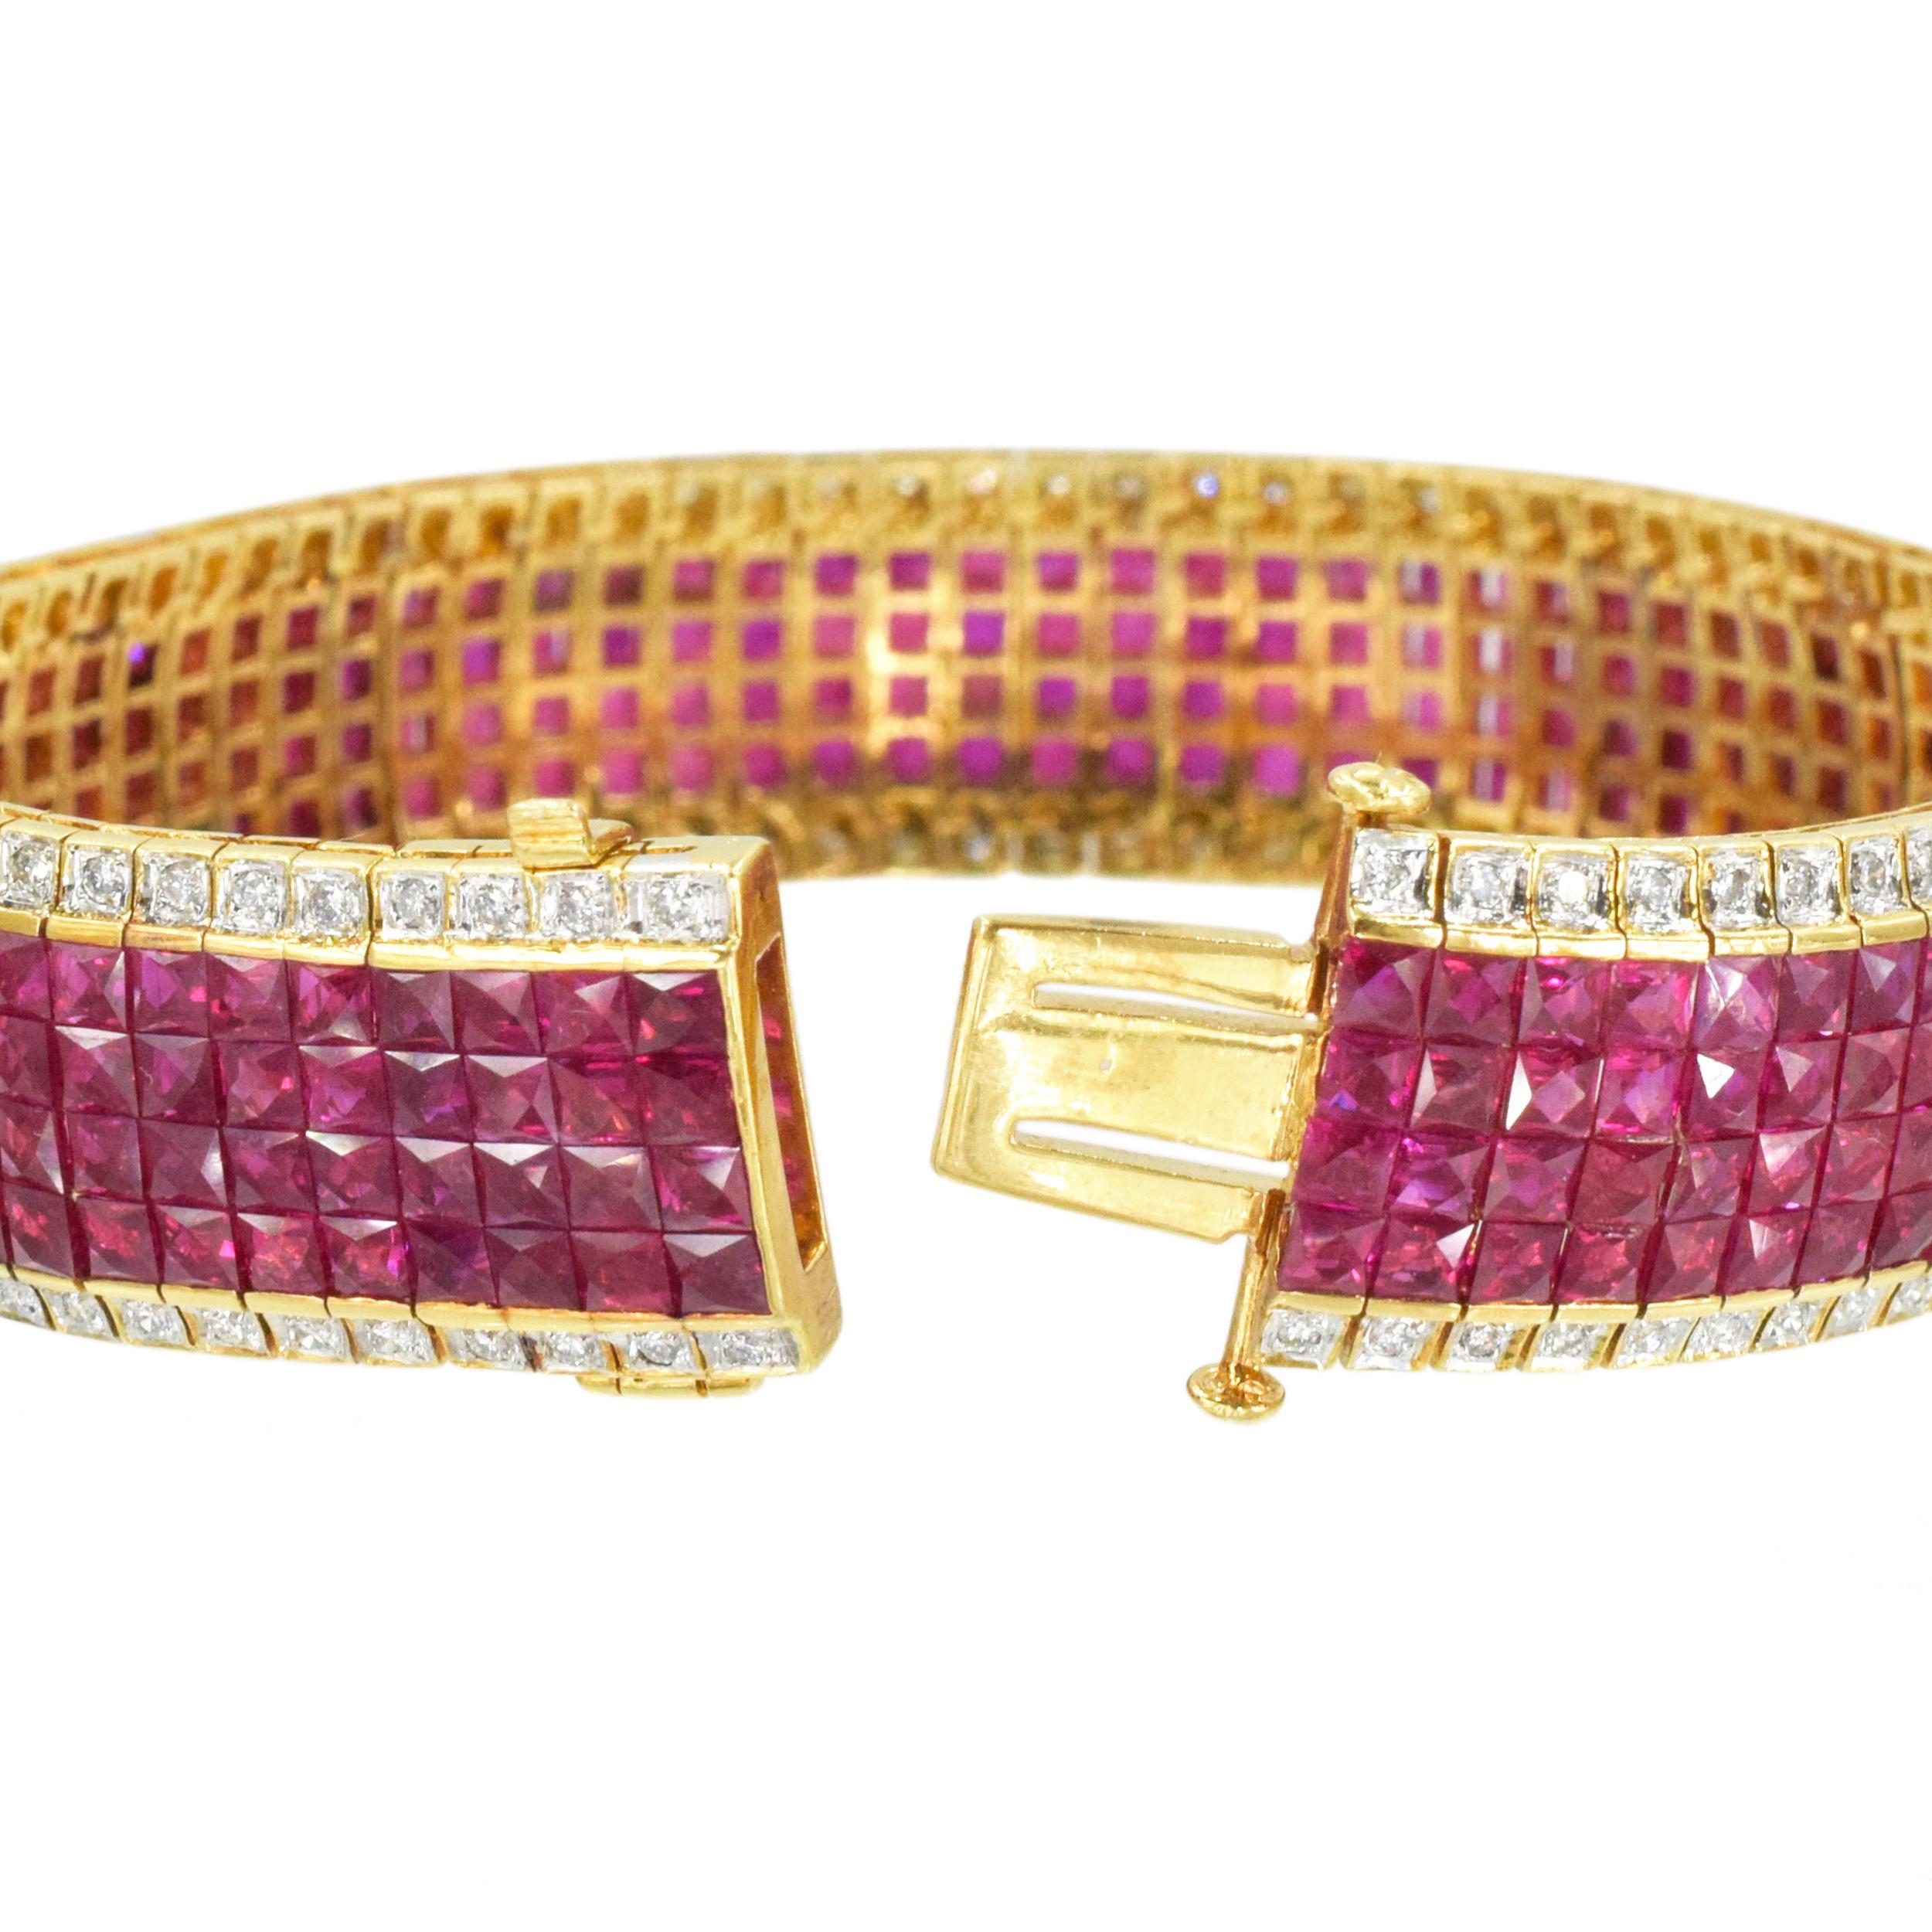 Invisibly set ruby and diamond bracelet crafted in 18k yellow gold. Circa 1990's.
Center features four rows of invisibly set rubies, accented with a row of round brilliant
cut diamonds on each side. There is total of 300 square cut rubies with